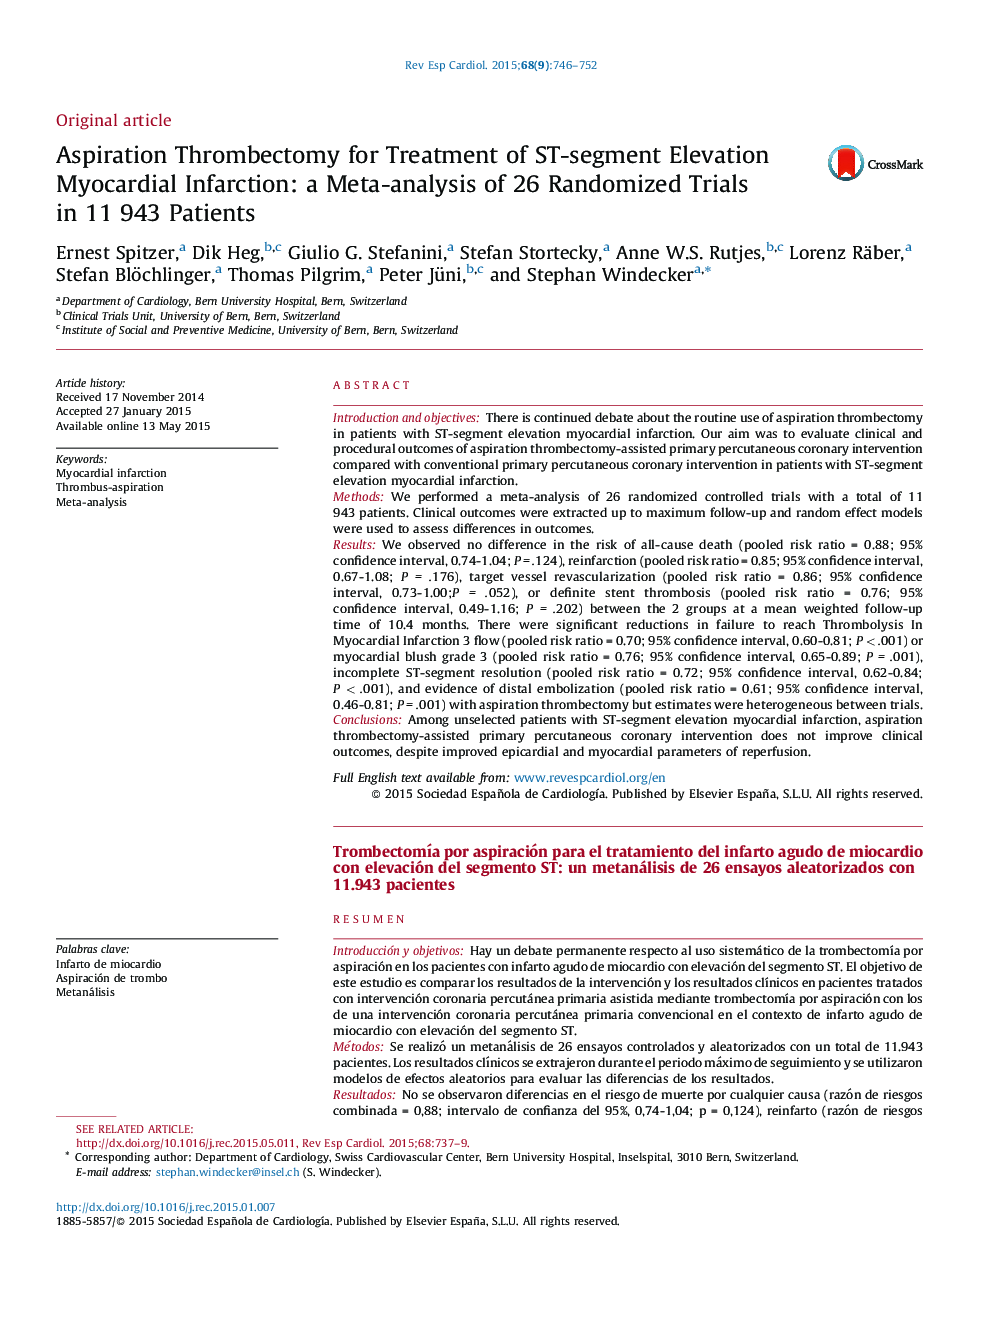 Aspiration Thrombectomy for Treatment of ST-segment Elevation Myocardial Infarction: a Meta-analysis of 26 Randomized Trials in 11 943 Patients